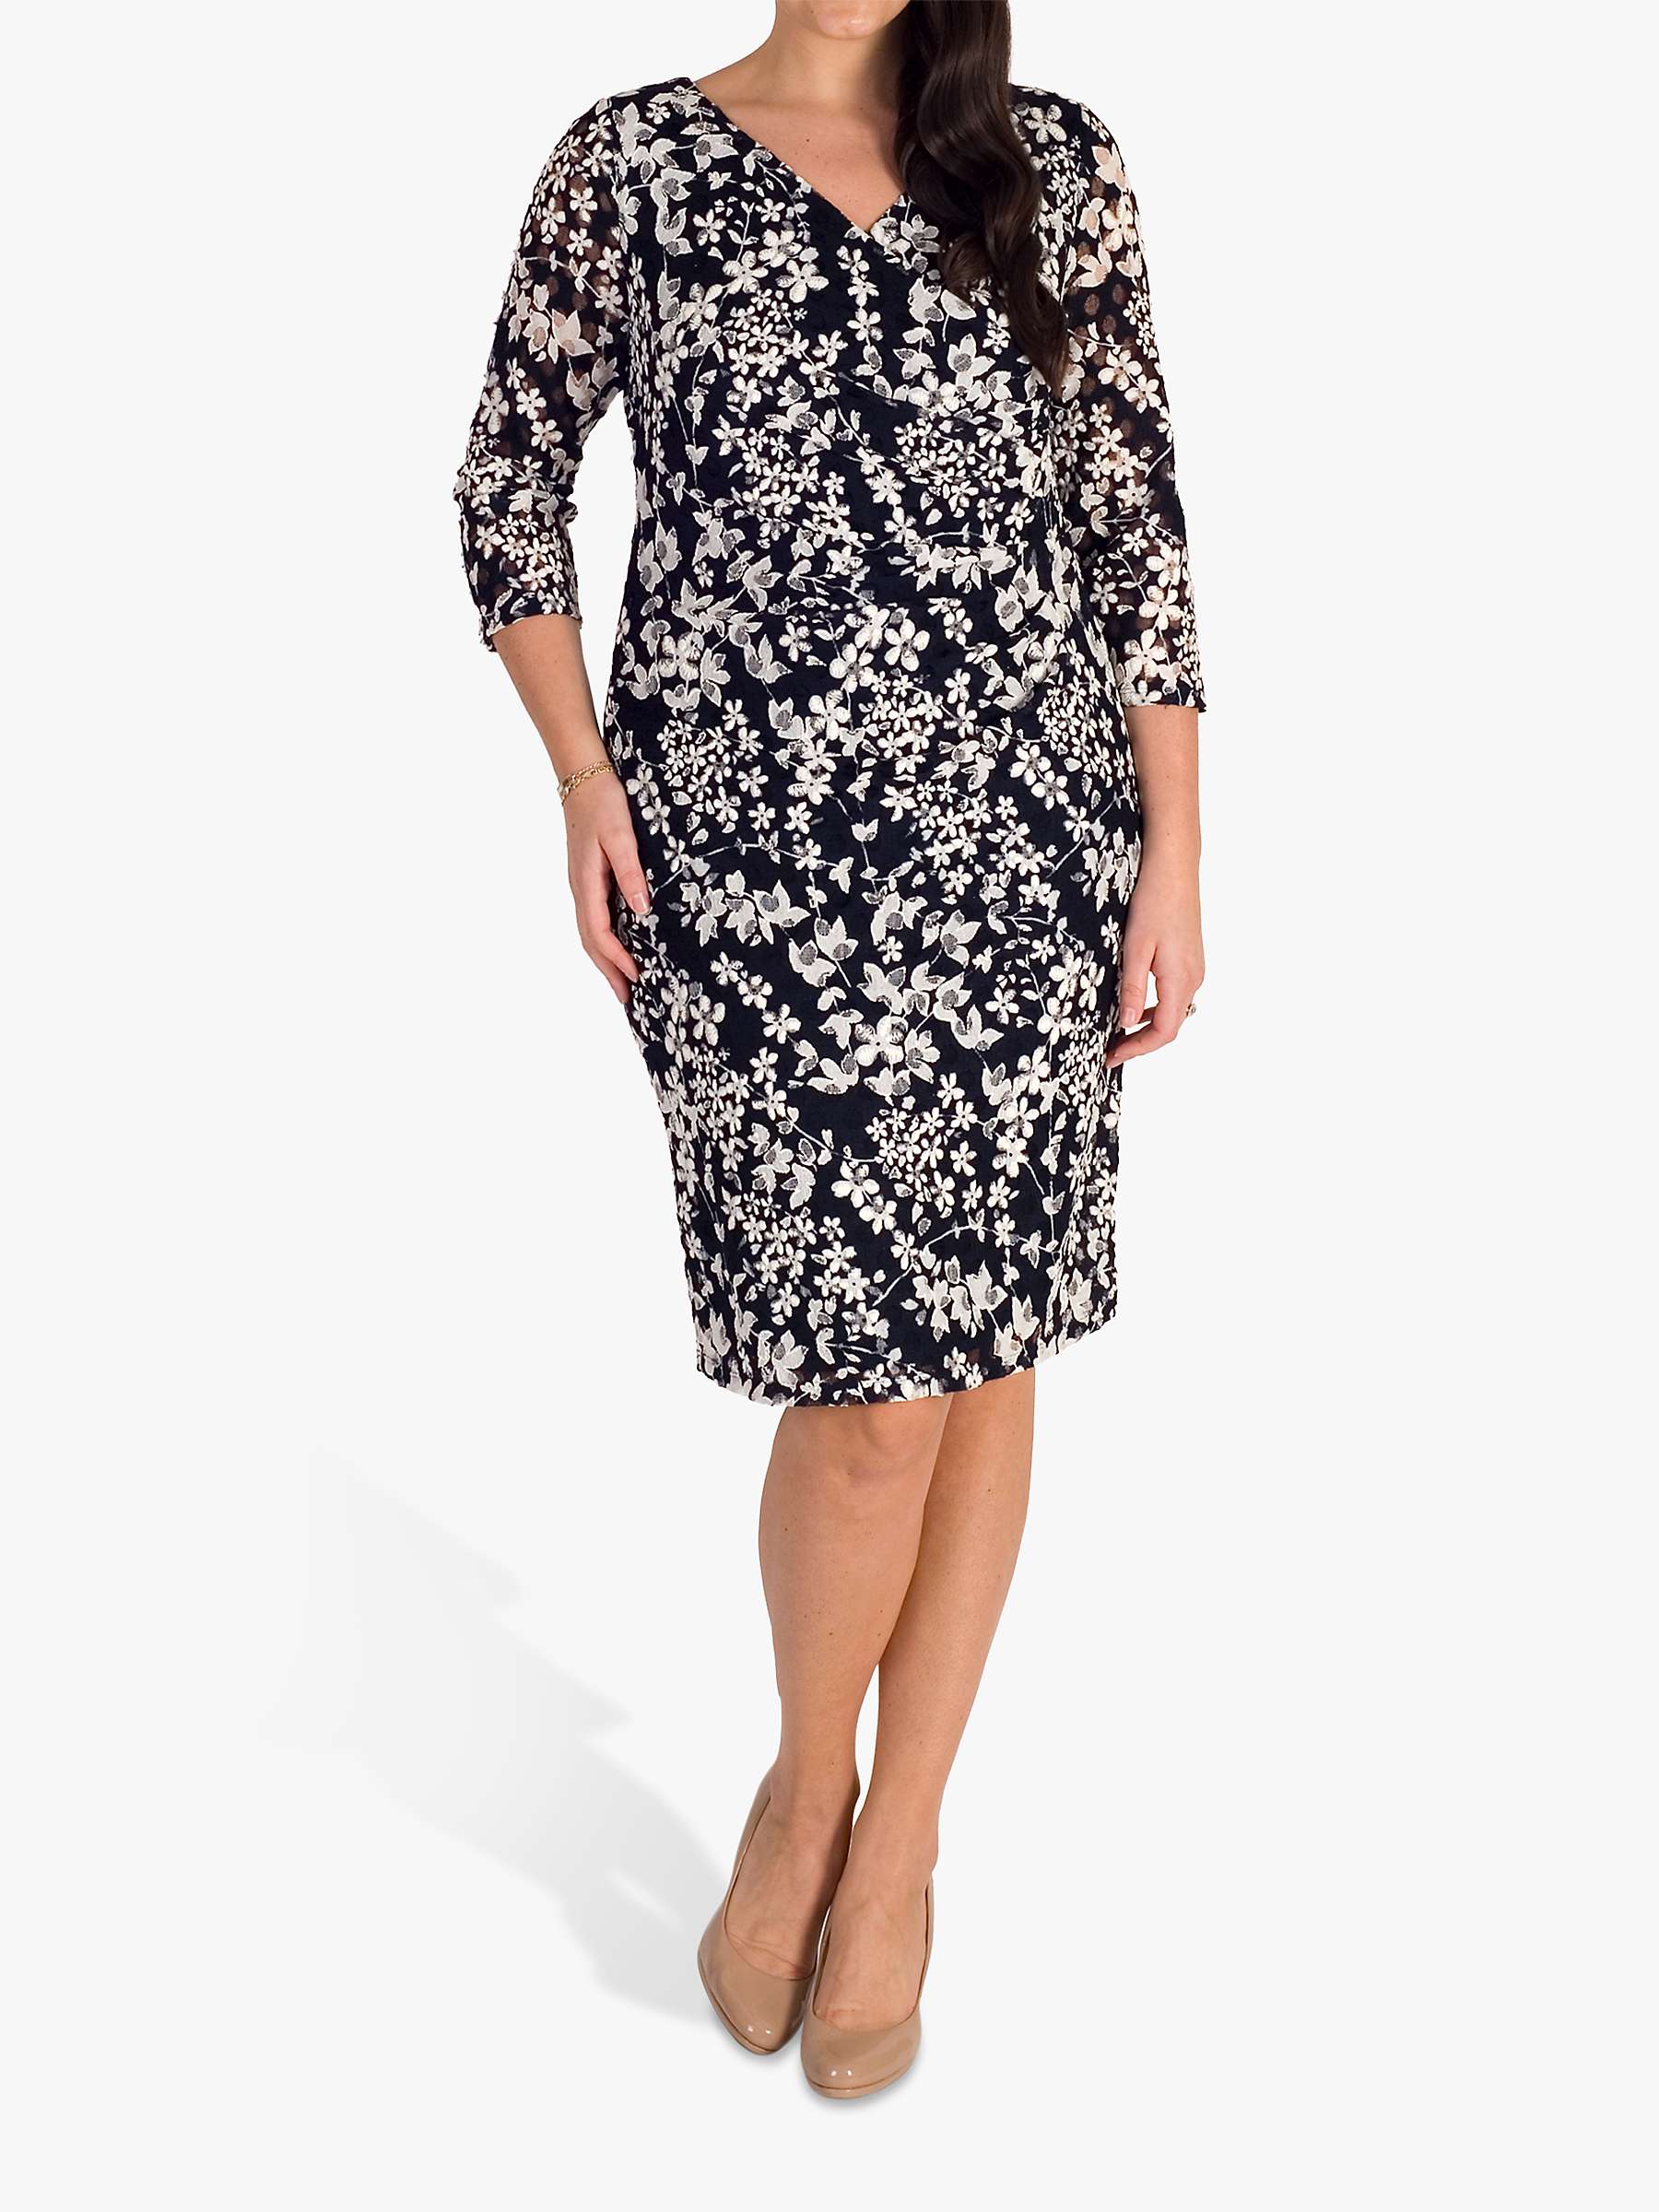 Buy chesca Floral Midi Dress, Navy/White Online at johnlewis.com